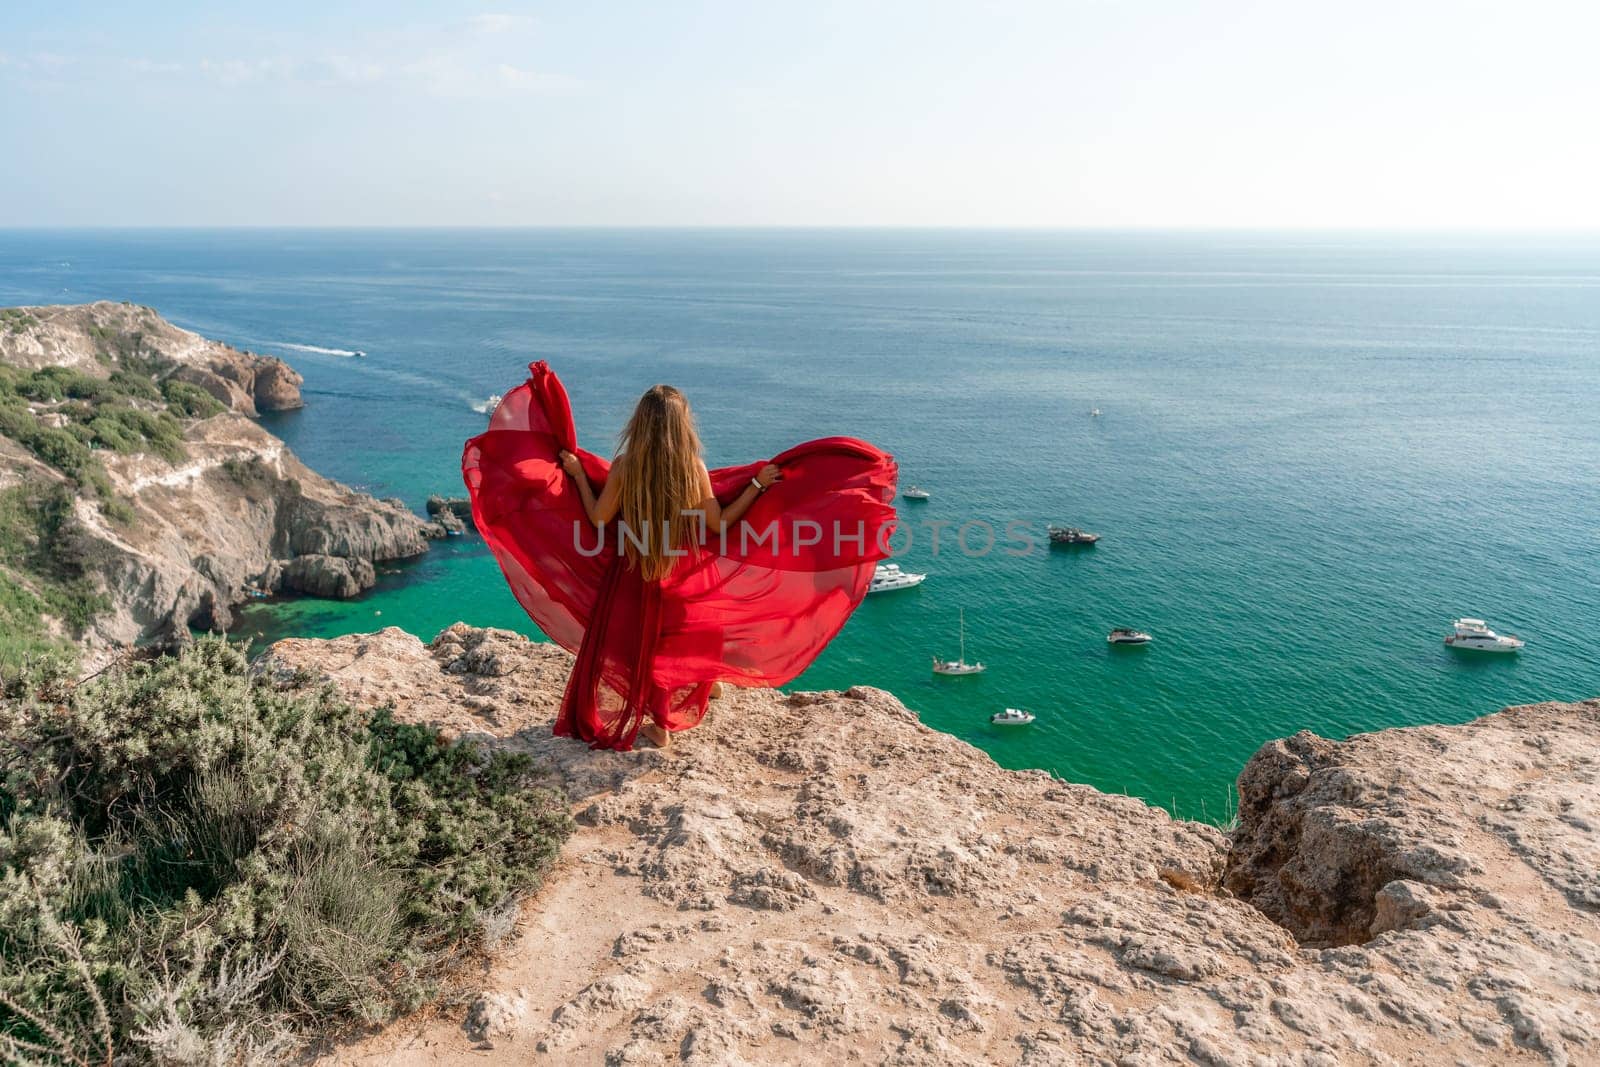 Woman sea red dress yachts. A beautiful woman in a red dress poses on a cliff overlooking the sea on a sunny day. Boats and yachts dot the background. by Matiunina